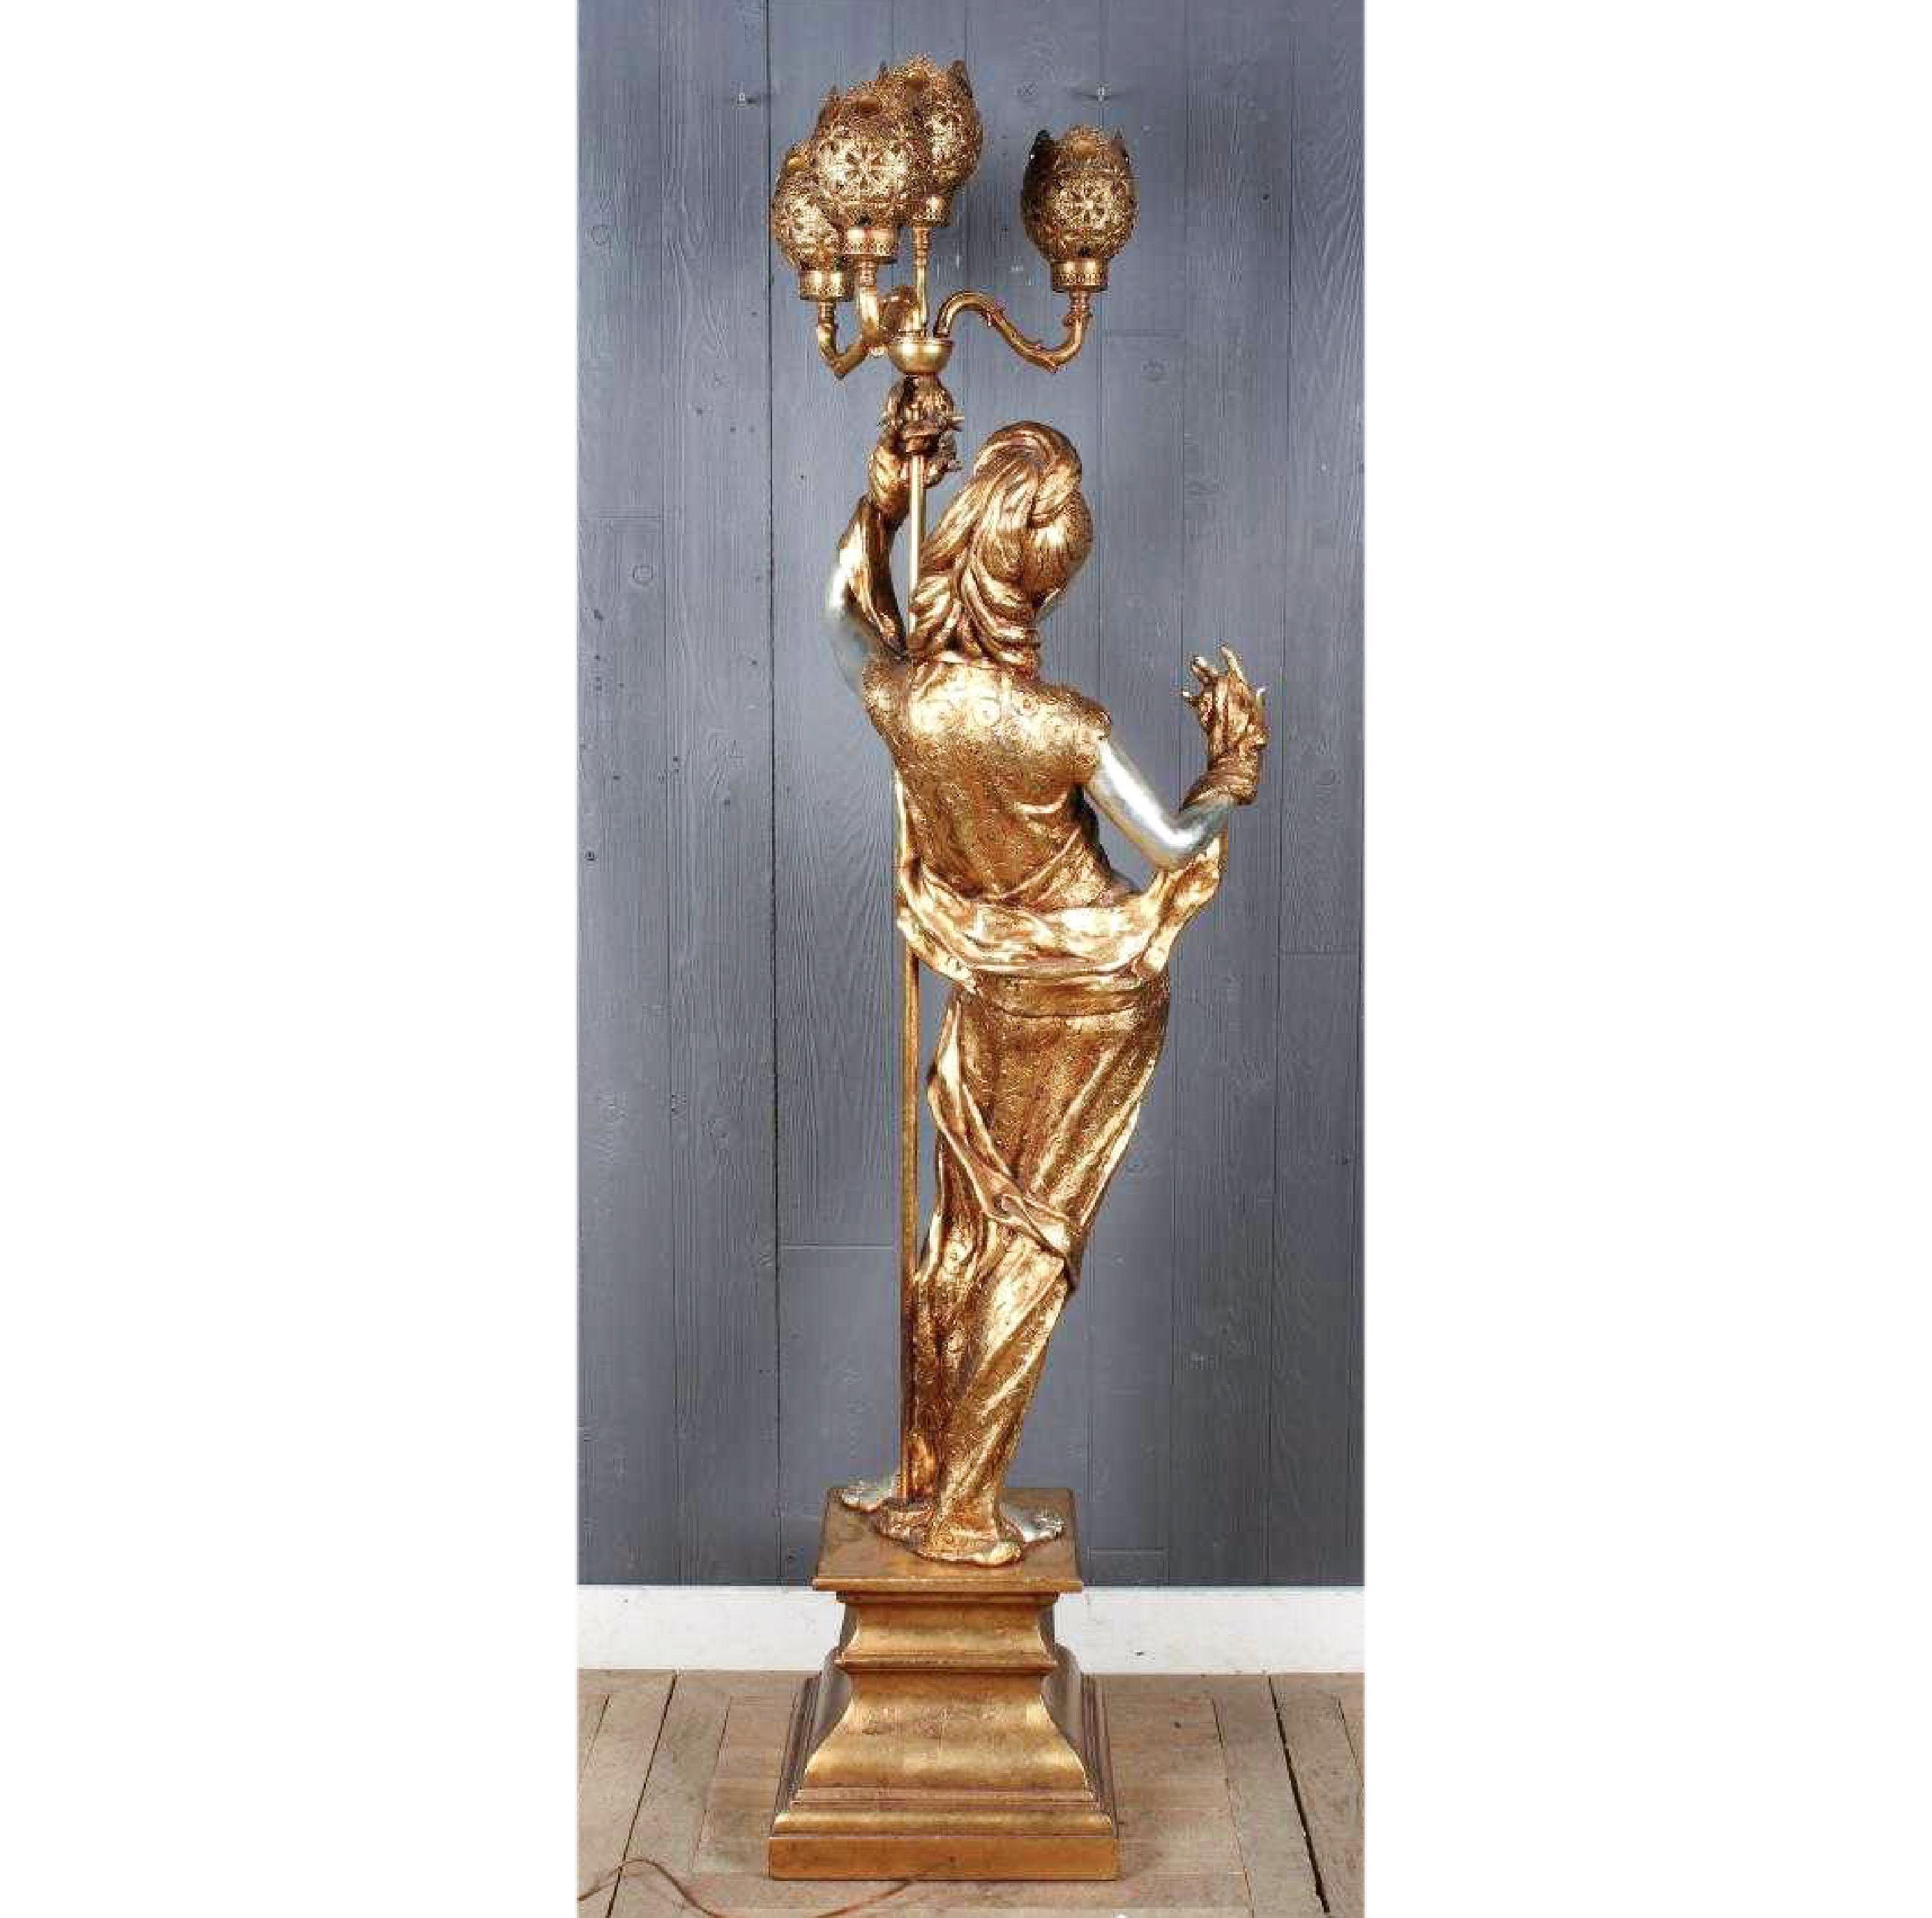 A large indoor figural post lamp in the form of a kitschy classical maiden by Atelier de Recherche Plastique, 'ARP' Copyright mark 'ARP' to the back Gilt ornament accentuate the contraposto and narrowness of the waist as well as the almost medieval